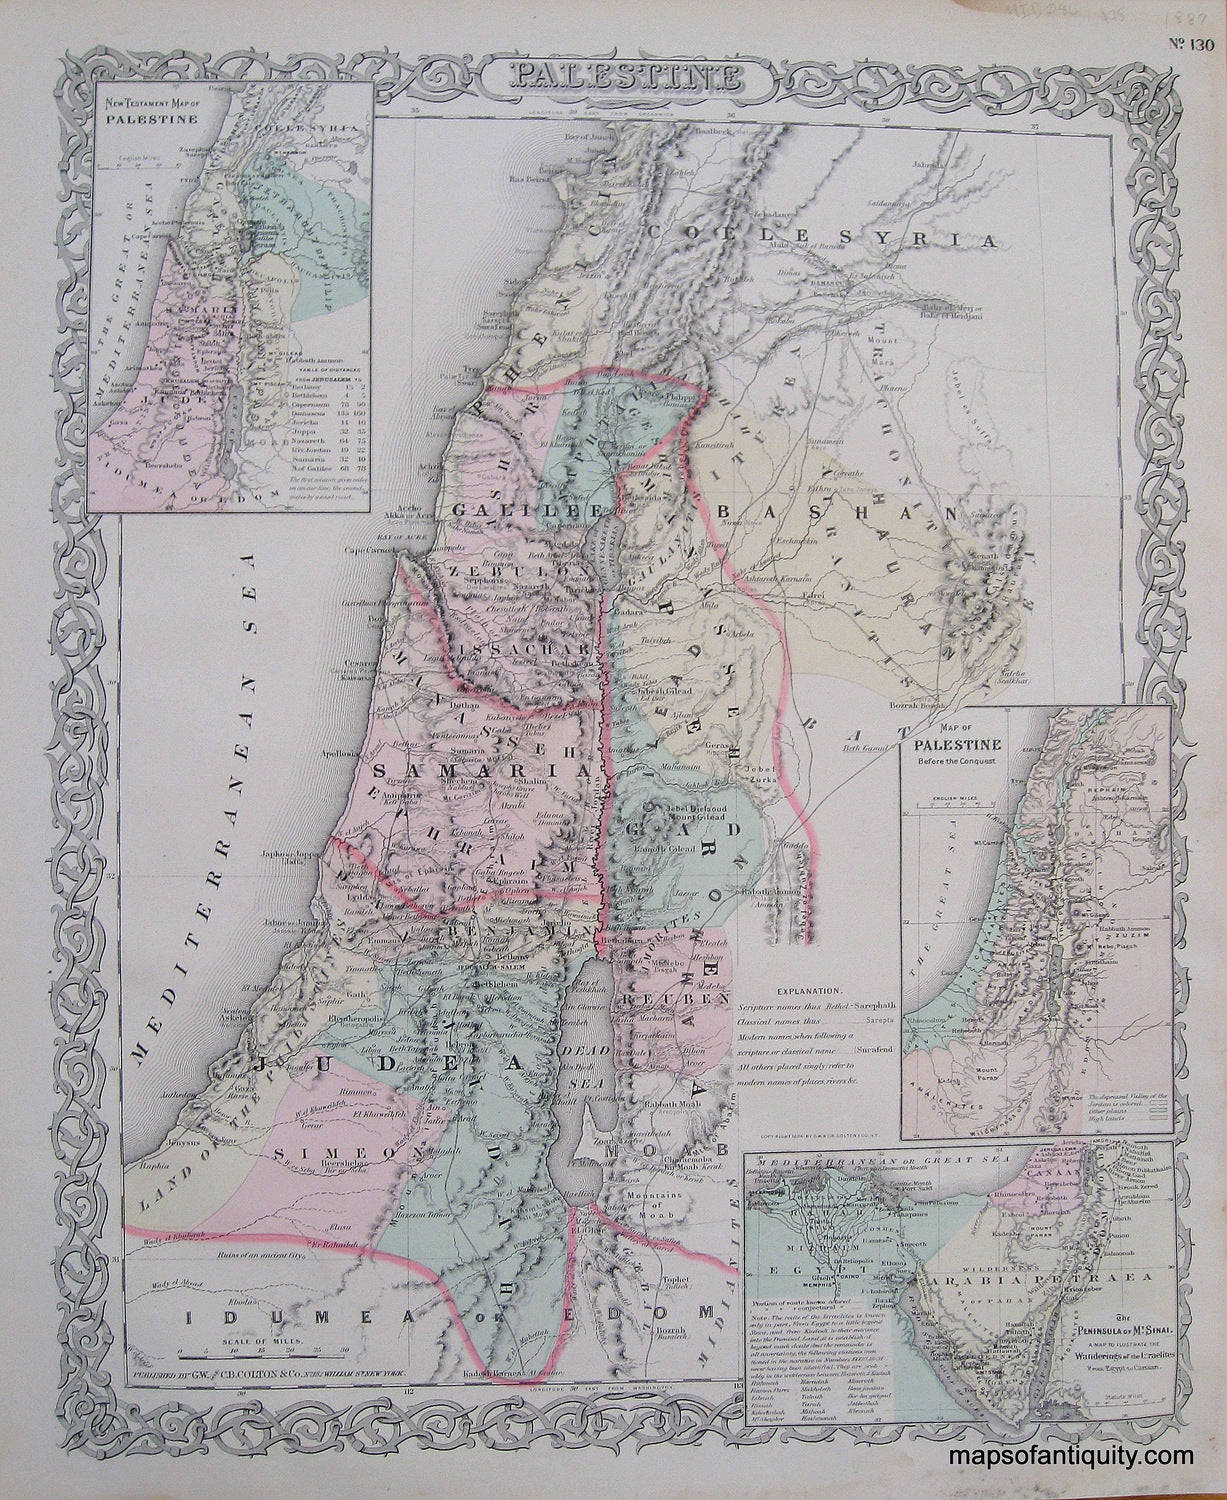 Antique-Hand-Colored-Map-Colton's-Palestine-**********-Middle-East-and-Holy-Land-Palestine-1887-Colton-Maps-Of-Antiquity